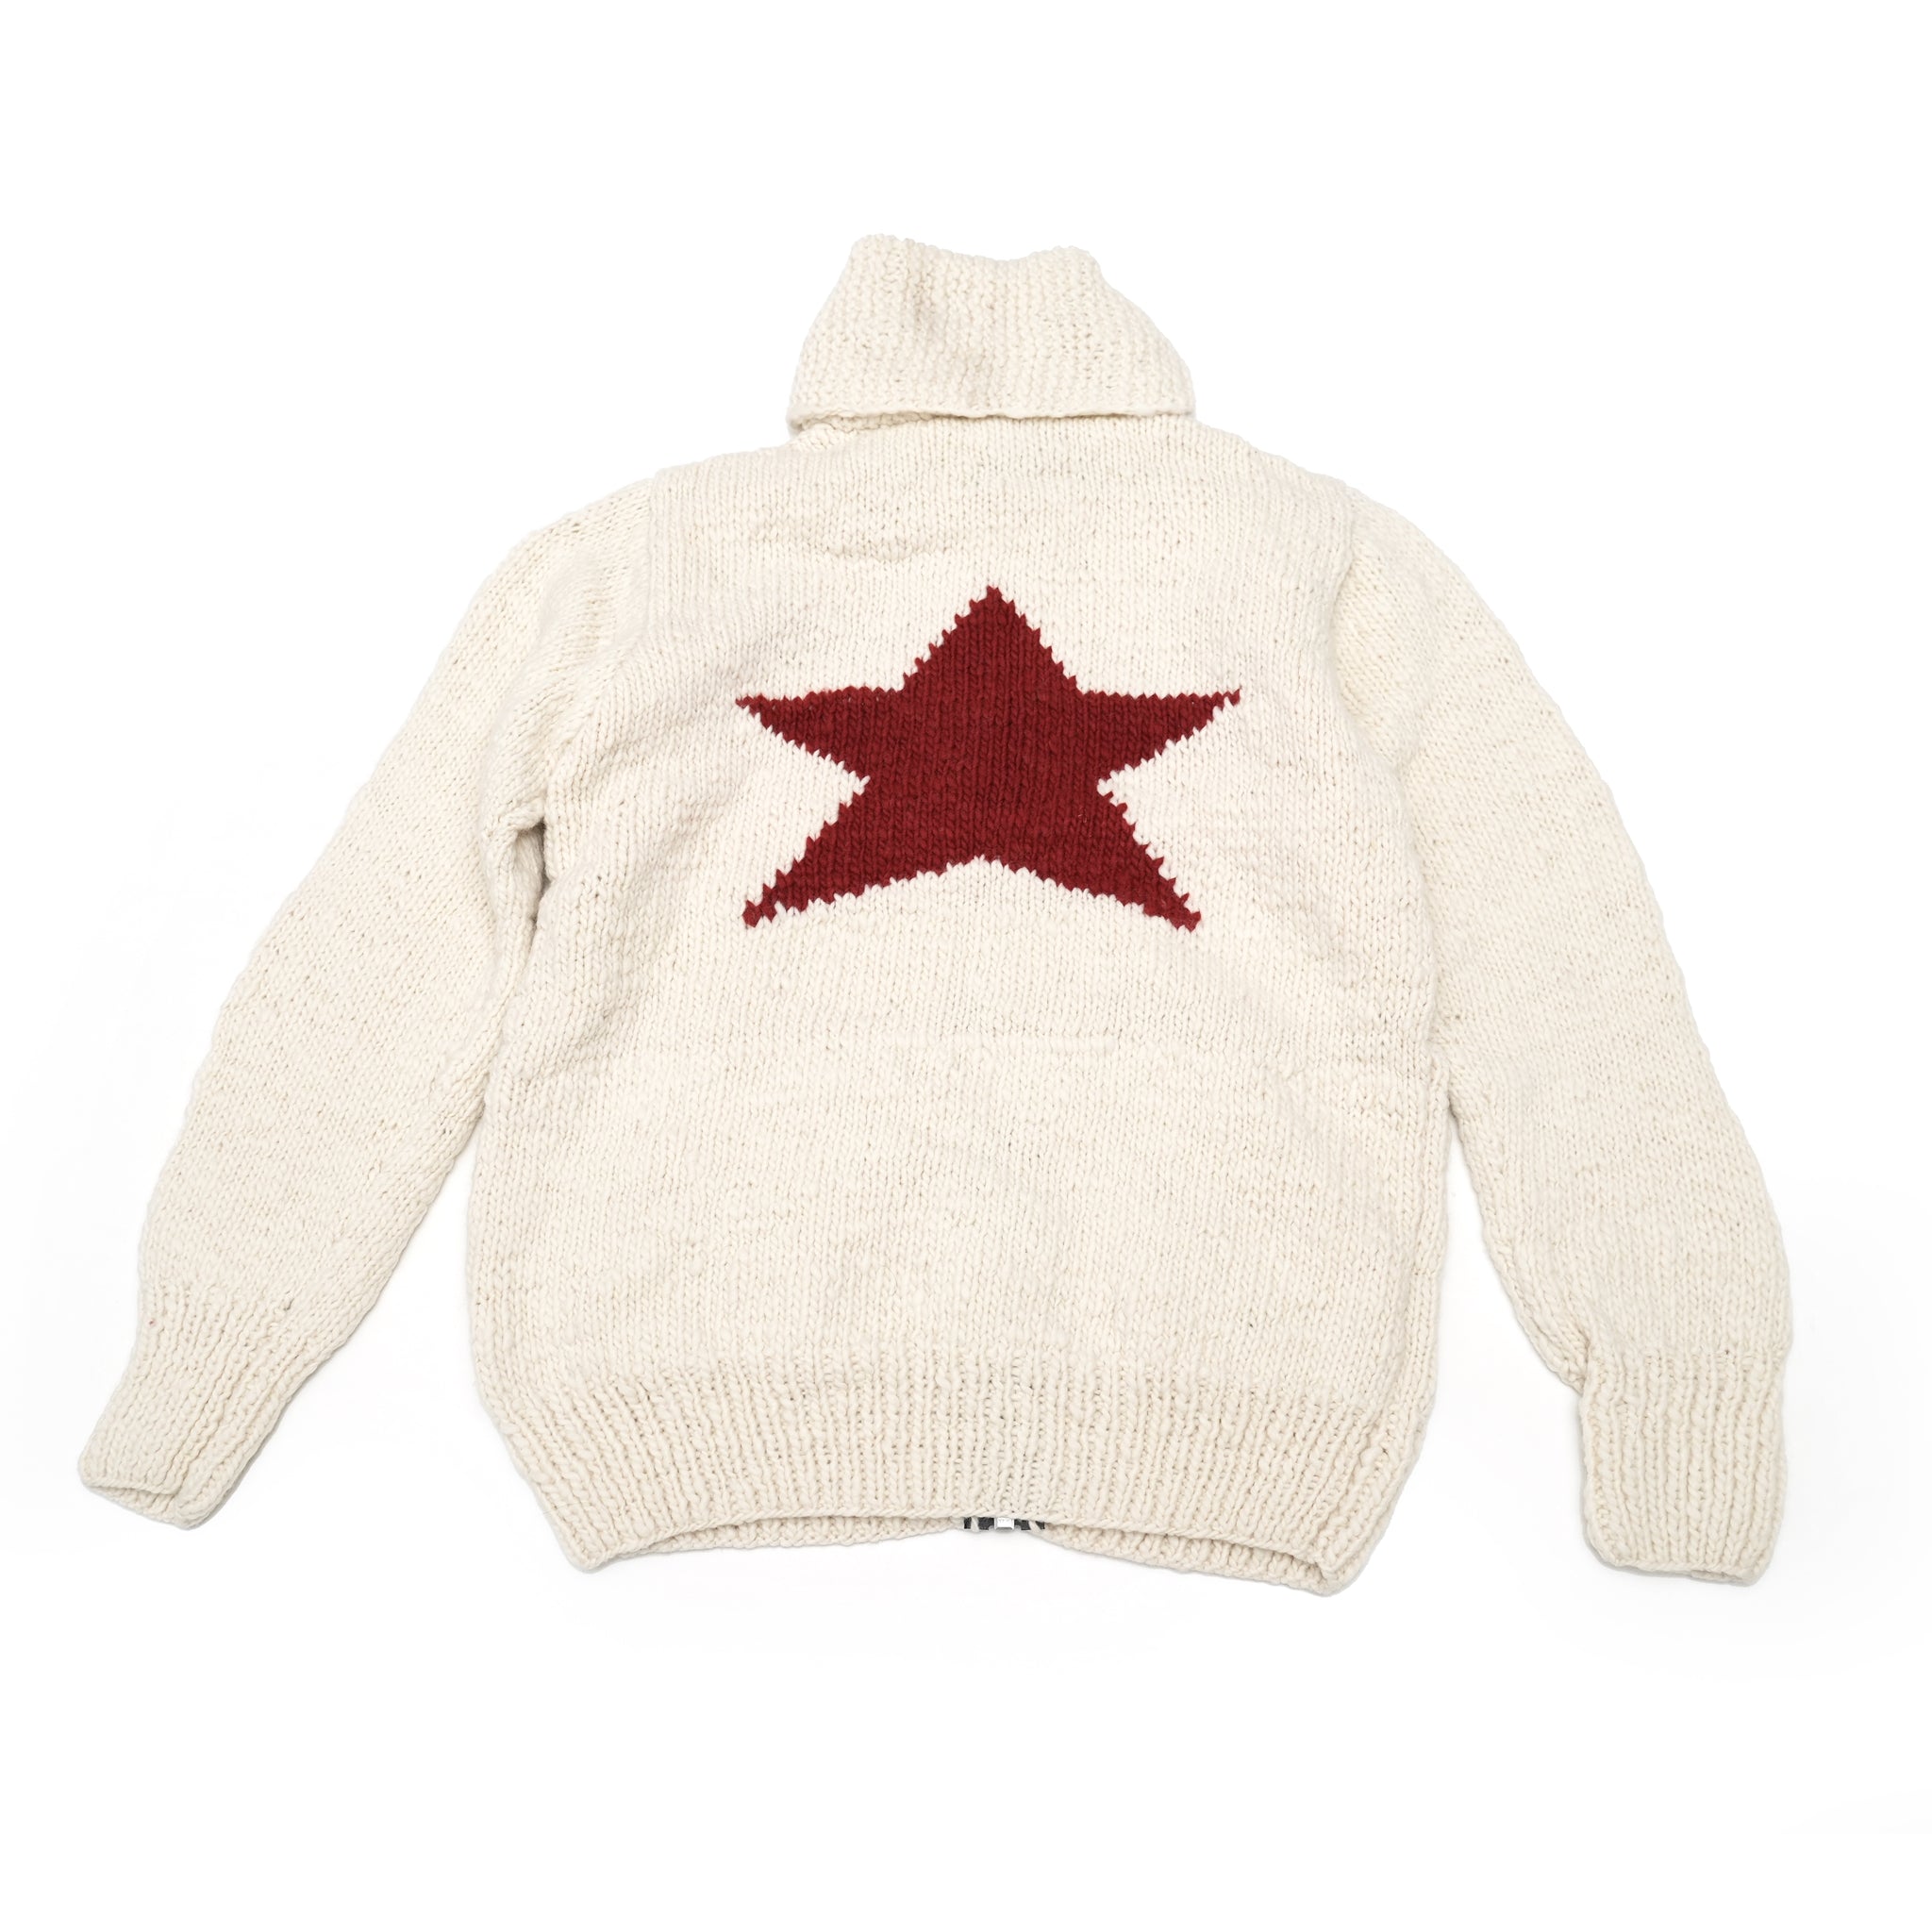 No:CHS81-01 | Name:Star Zipper Cardigan | Color:Ivory X Red